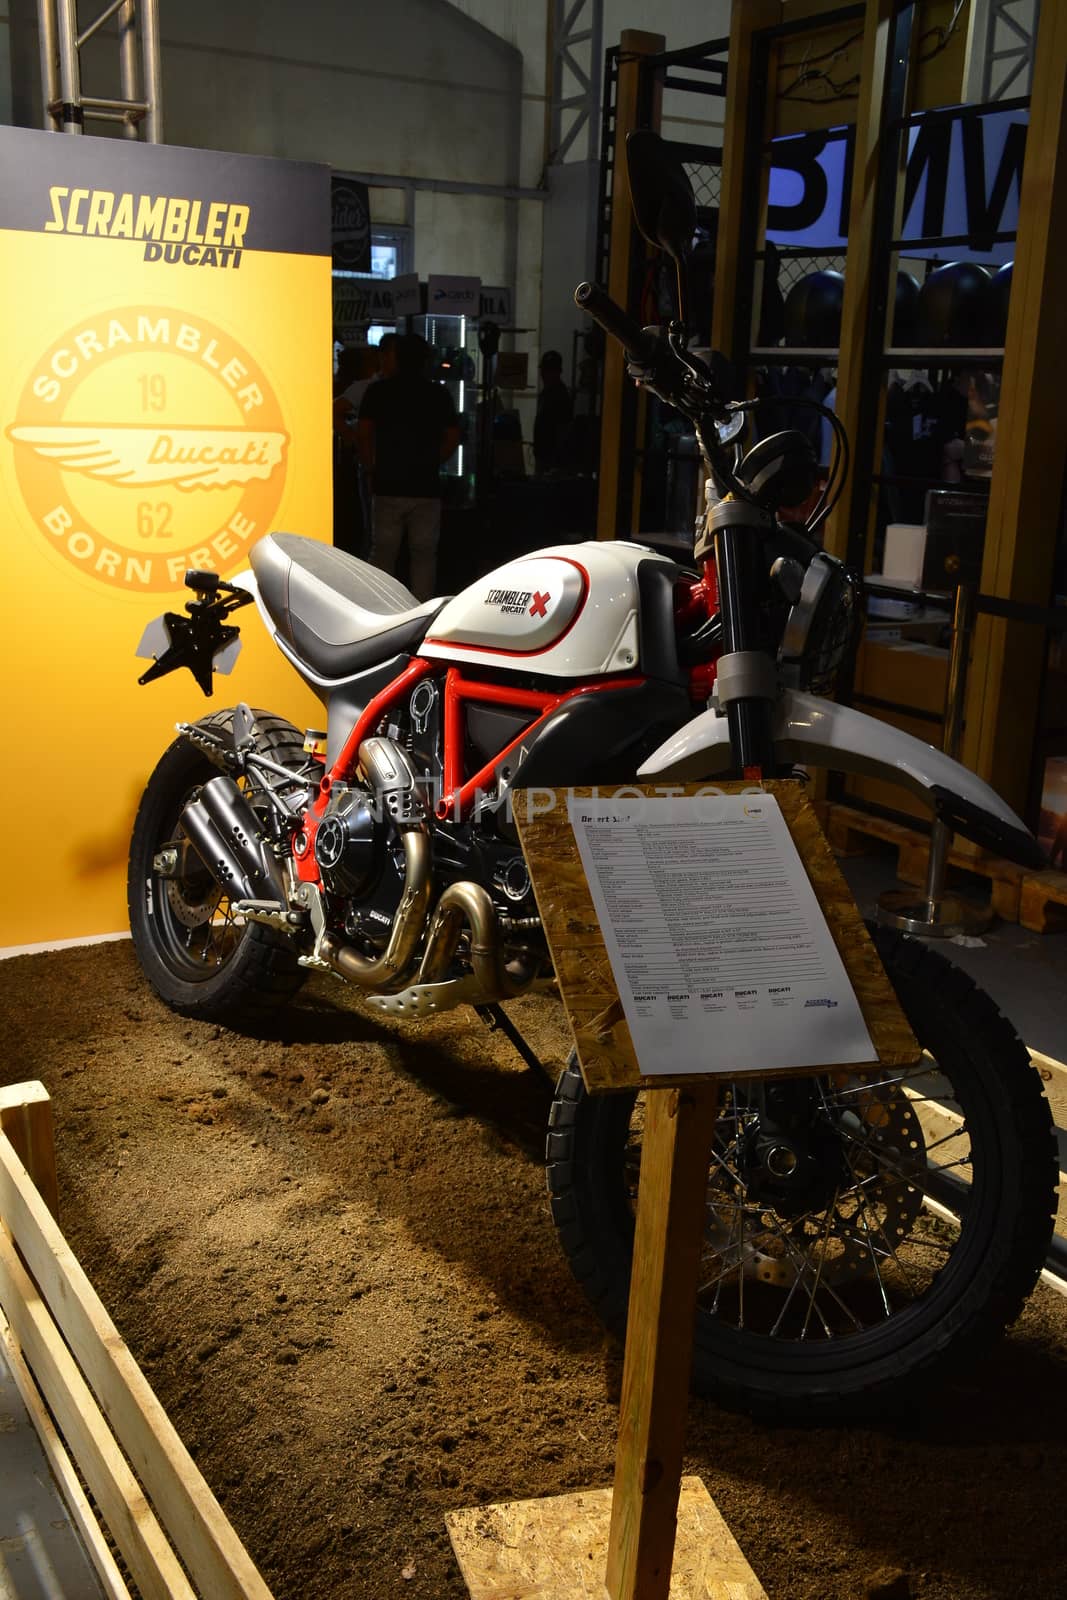 PASIG, PH - MAR. 7: Ducati scrambler motorcycle at 2nd Ride Ph on March 7, 2020 in Pasig, Philippines. Ride Ph is a motorcycle exhibit in the Philippines.